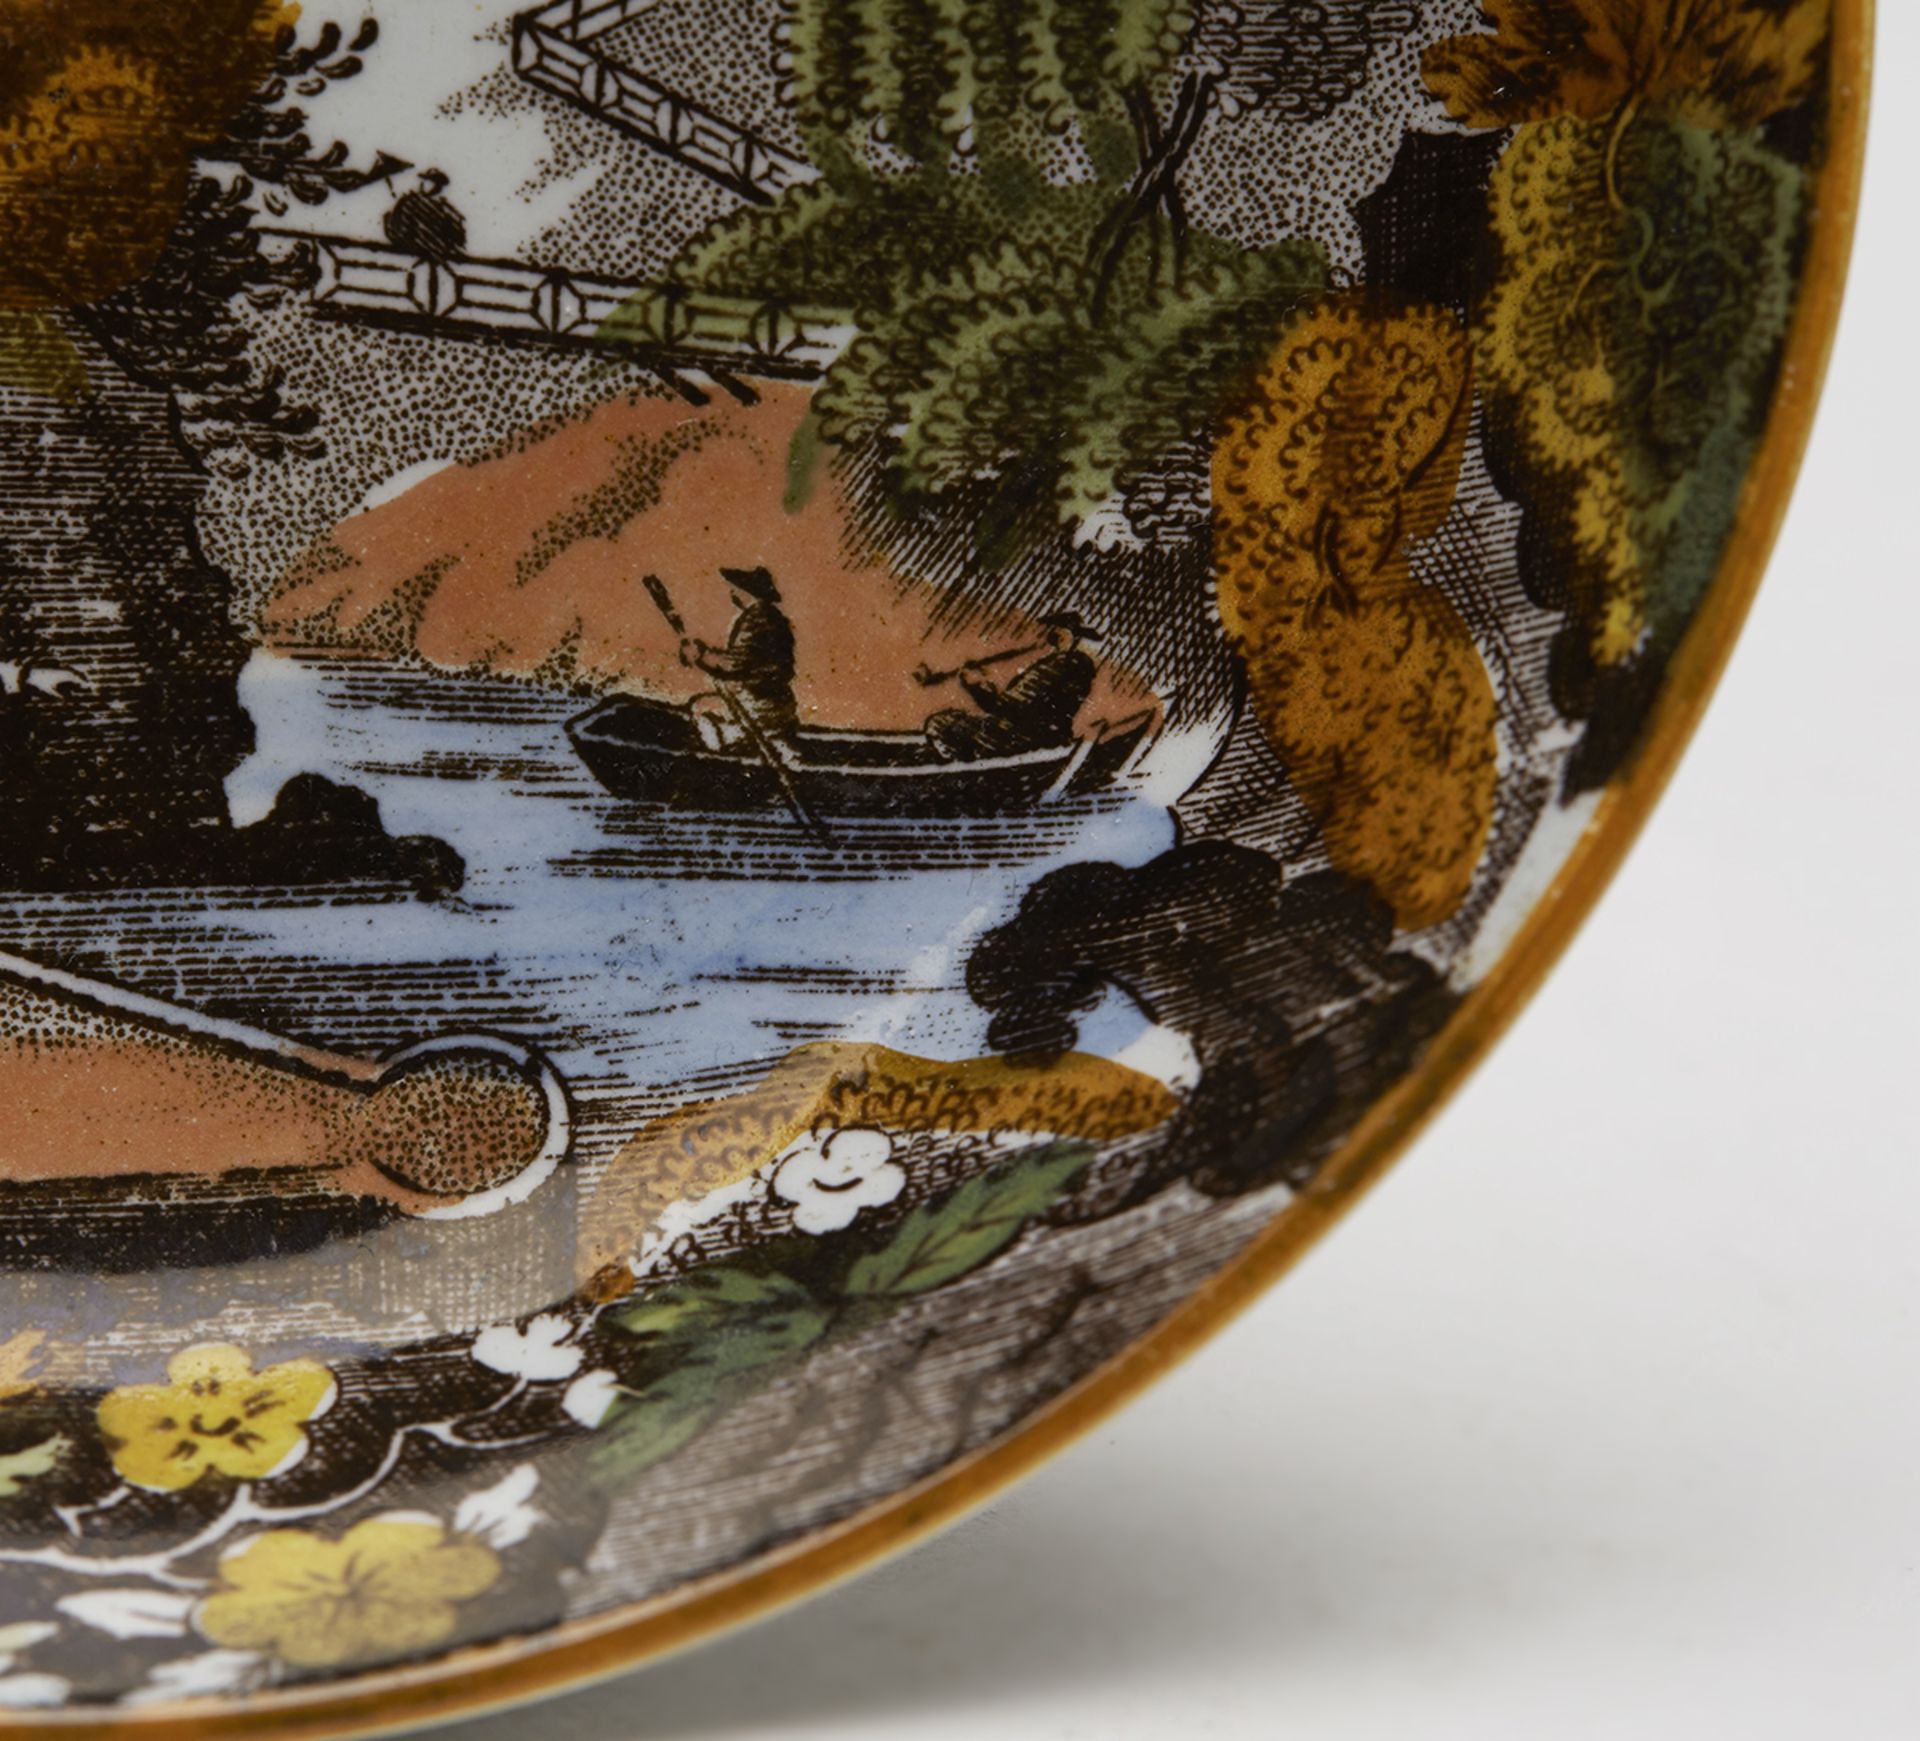 ANTIQUE HAND COLOURED TRANSFERWARE CHINOISERIE DISH 19 C. - Image 3 of 6